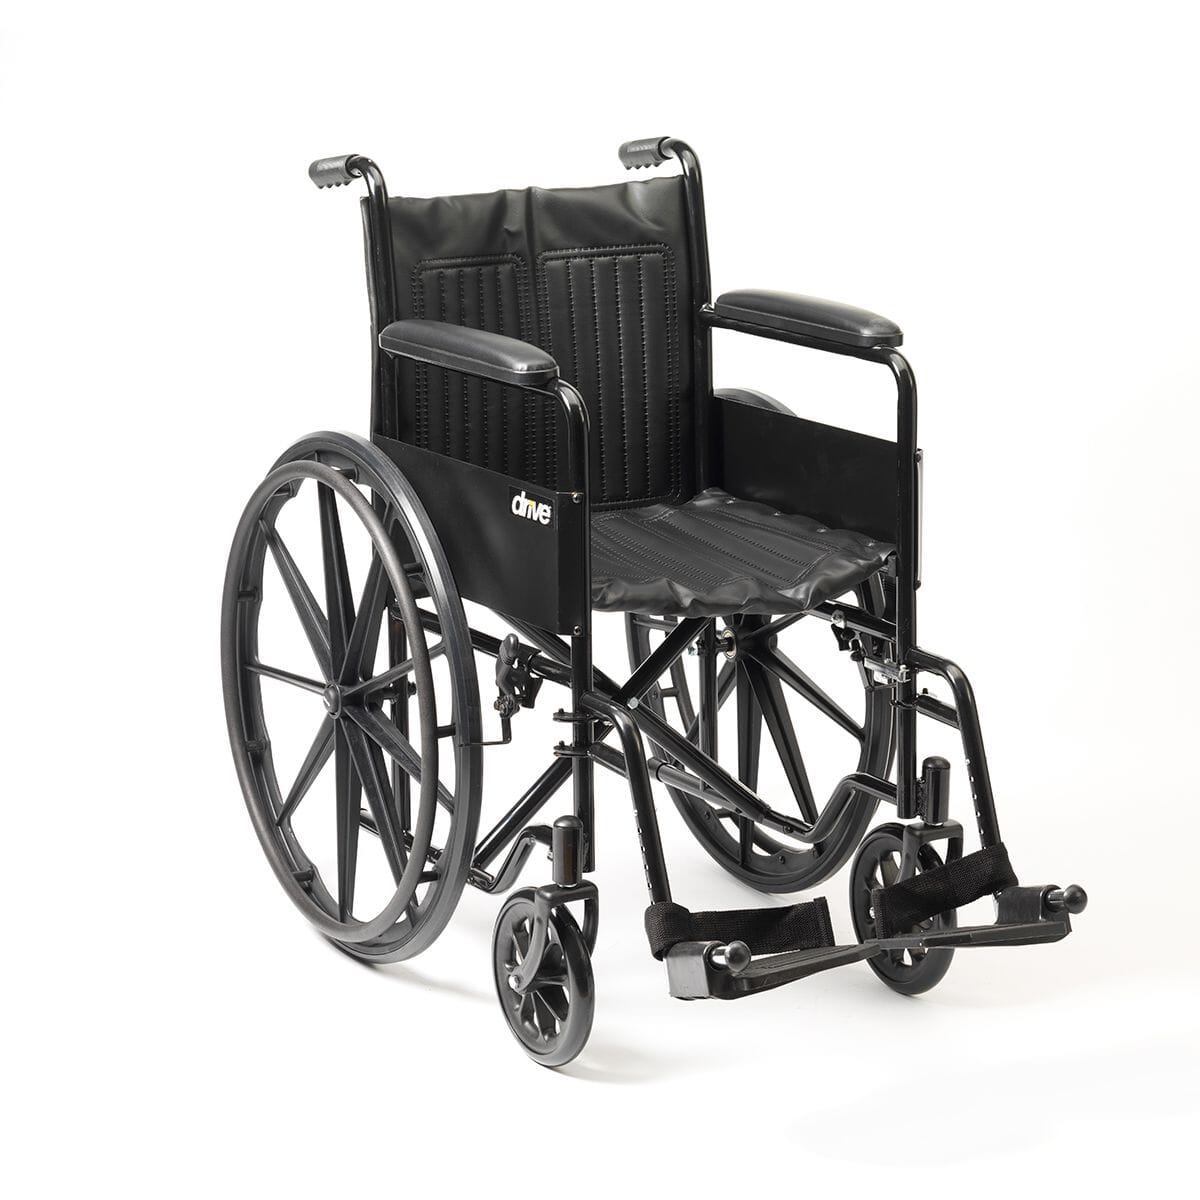 View Drive S1 Wheelchair Self Propel with New Mag Wheels information